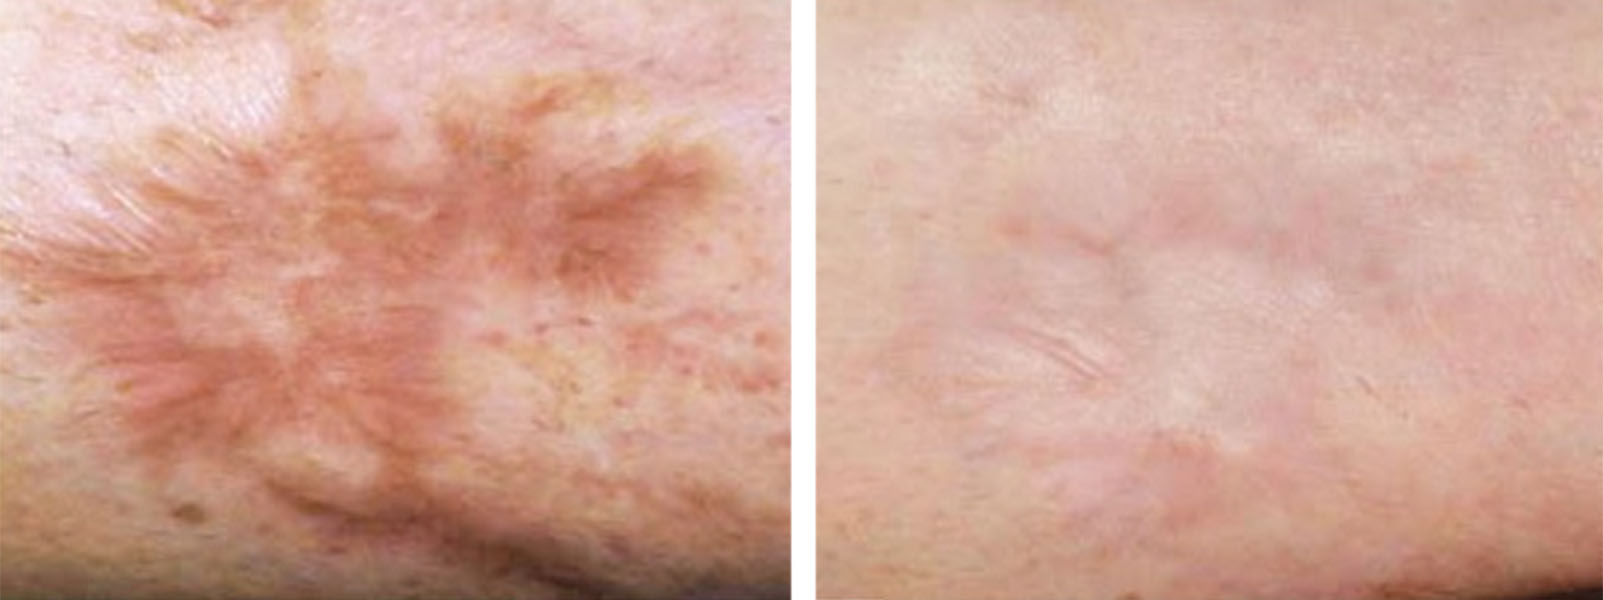 Laser Resurfacing patient before and after photo